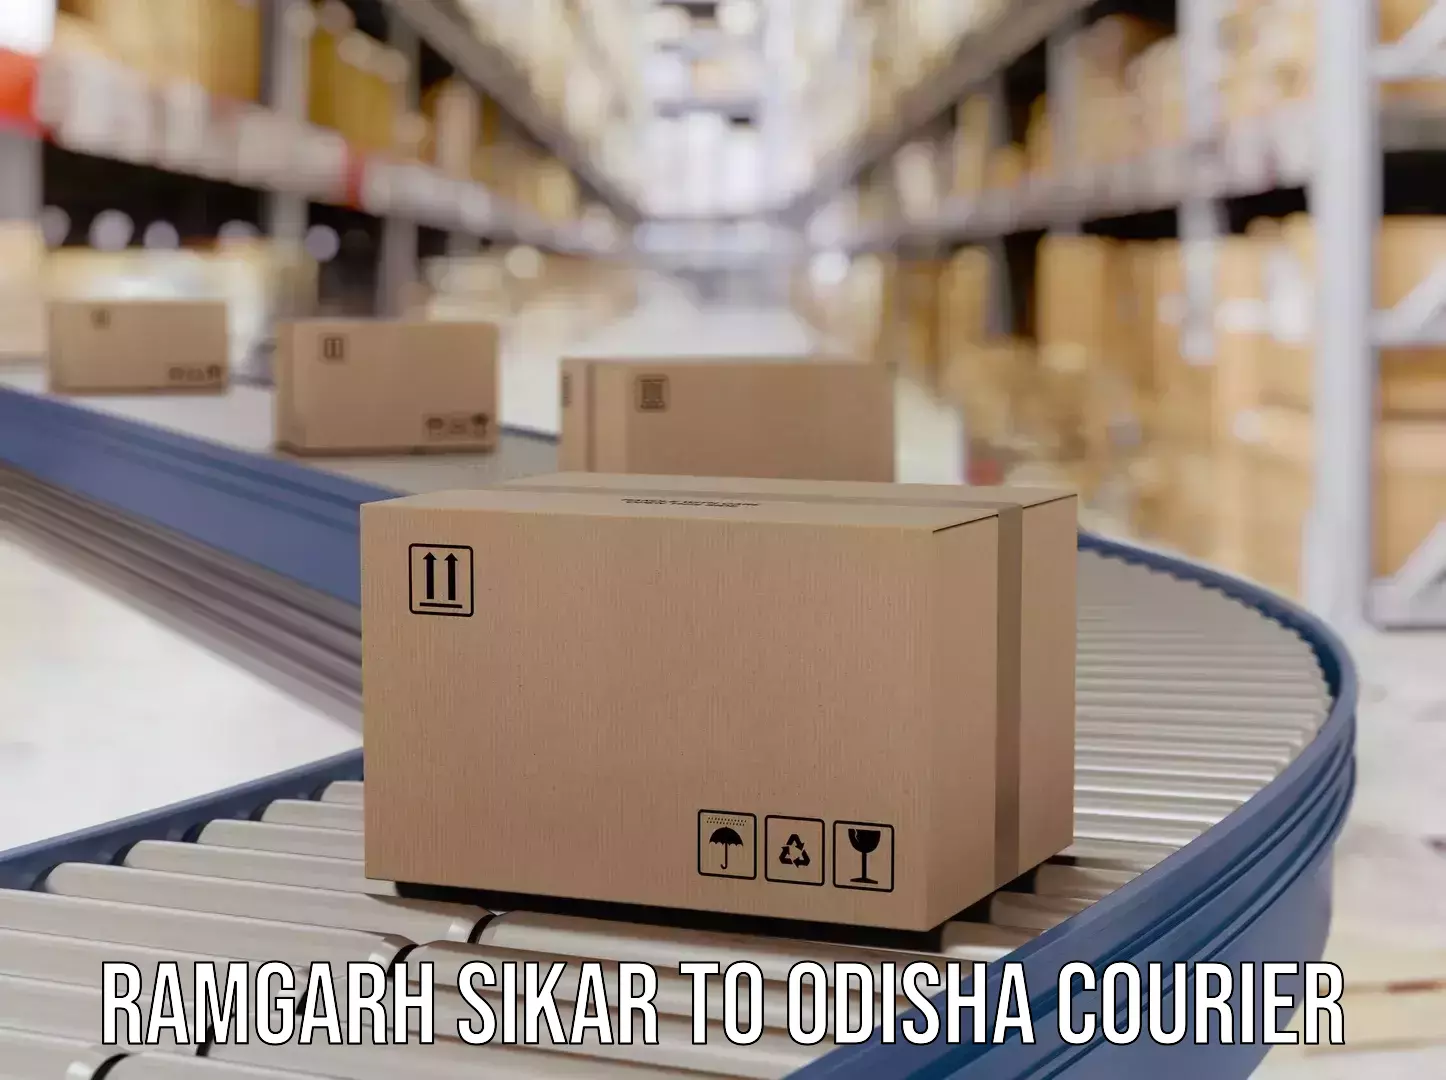 Multi-service courier options Ramgarh Sikar to Asika